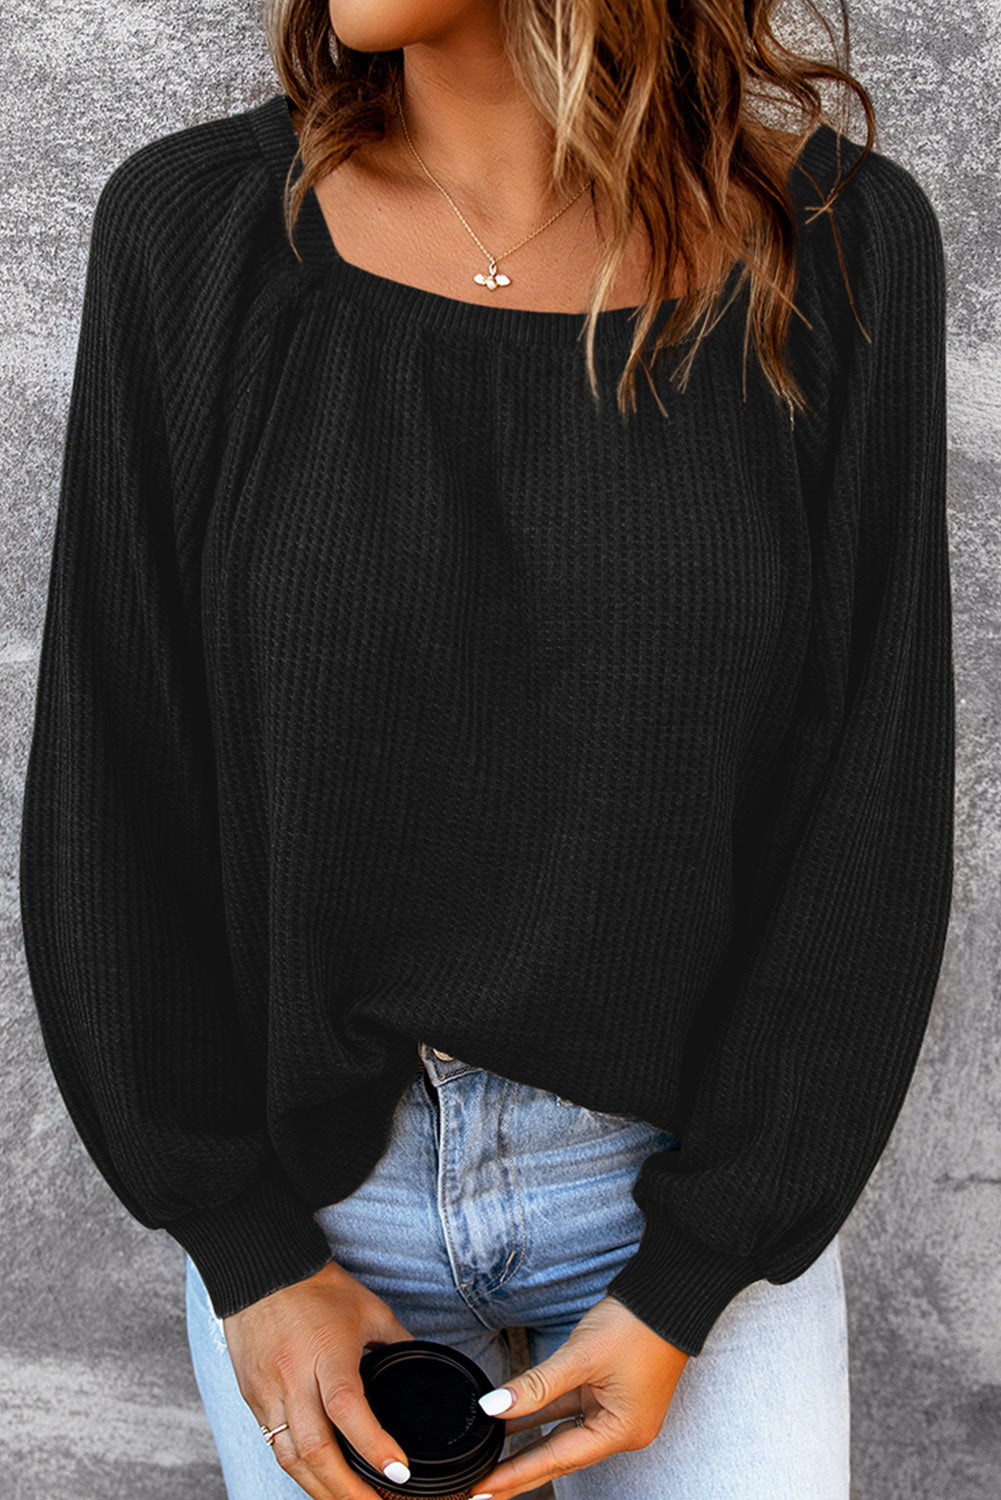 Black Scoop Neck Puff Sleeve Waffle Knit Top Long Sleeve Tops JT's Designer Fashion